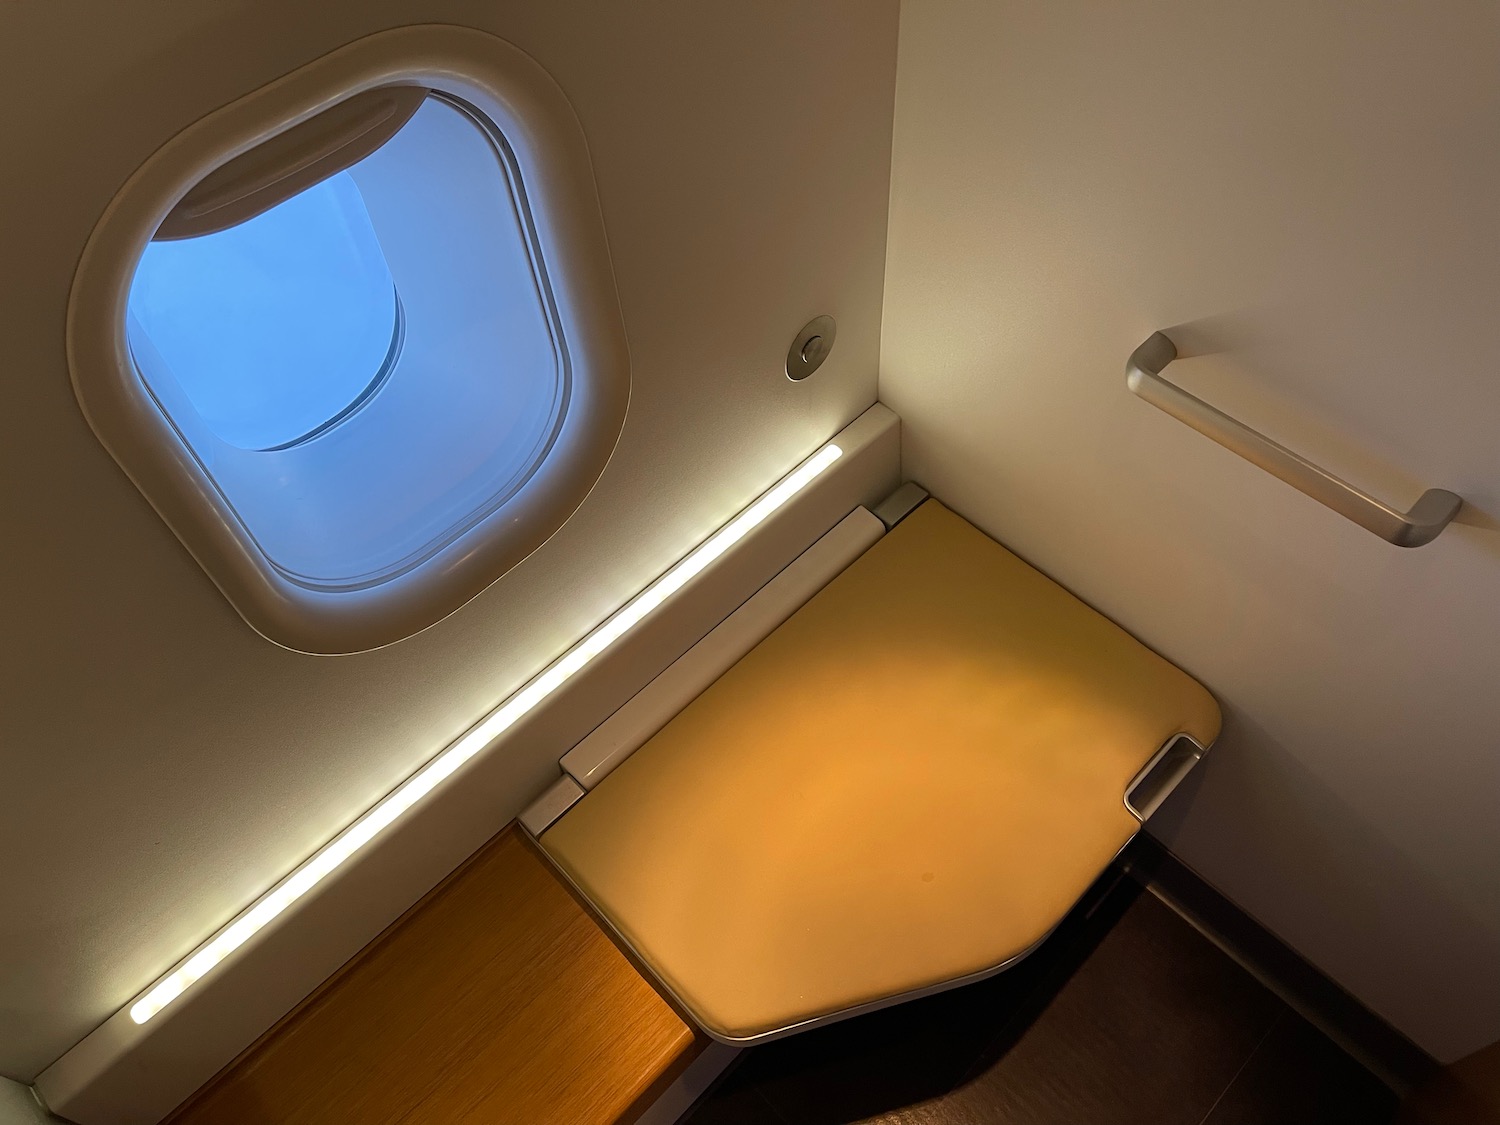 a toilet seat and window in a plane